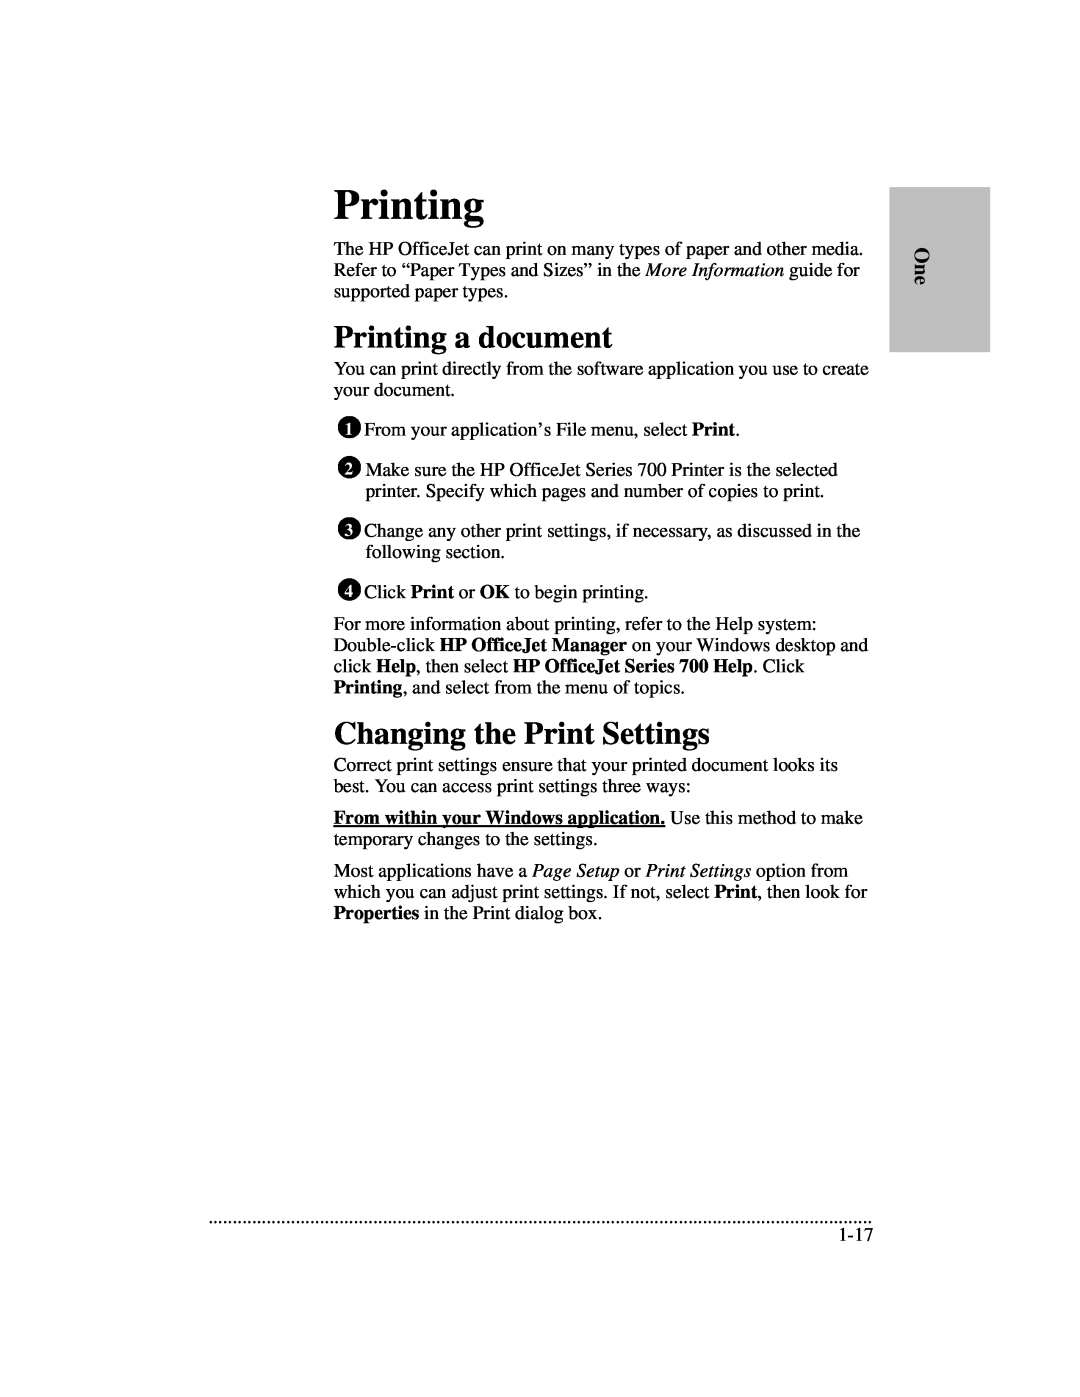 HP 700 manual Printing a document, Changing the Print Settings 